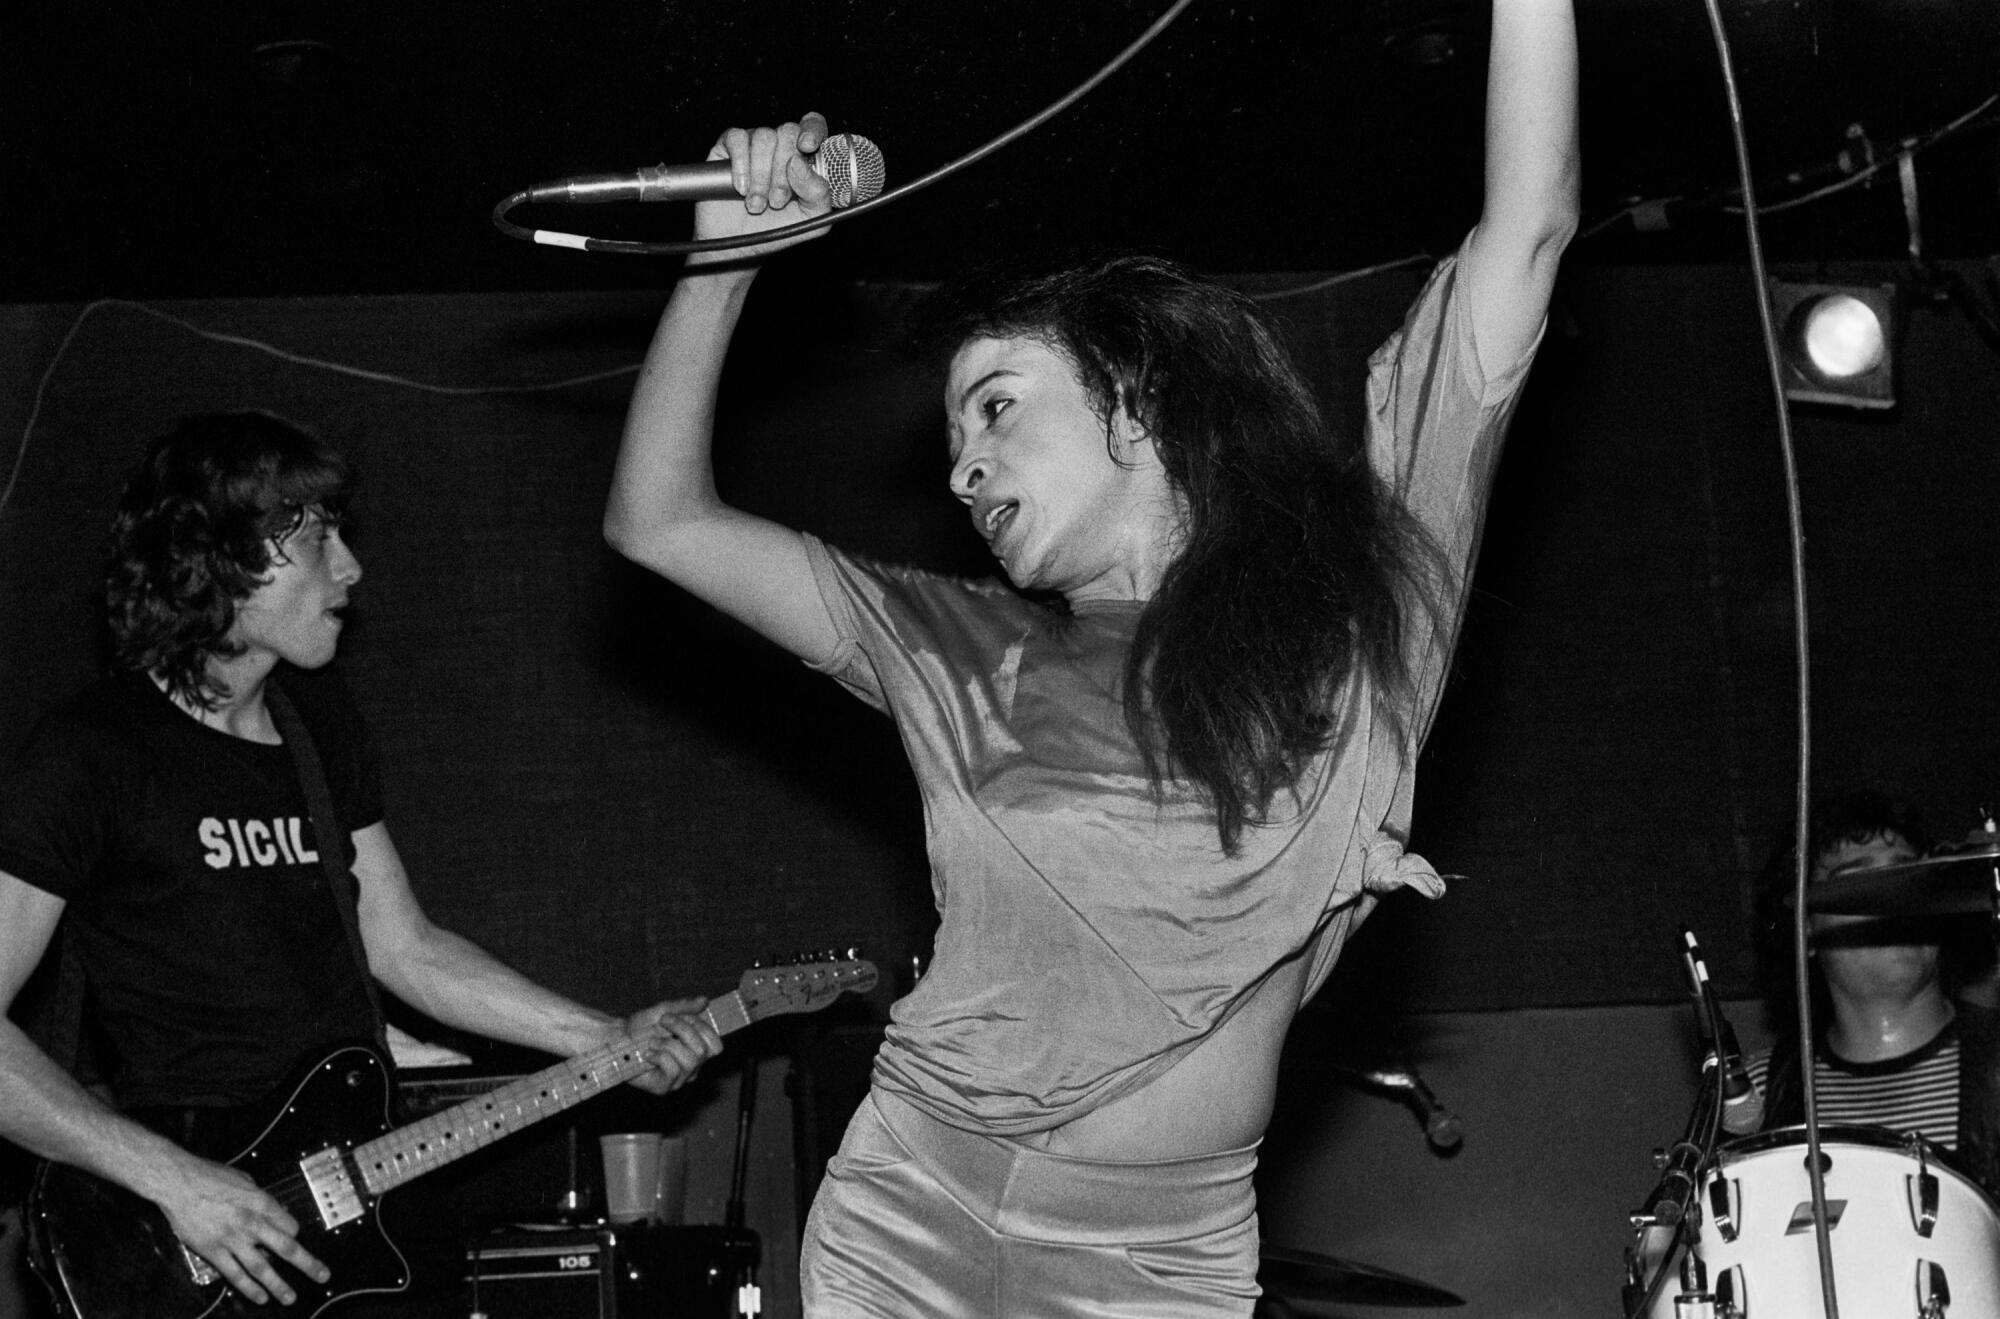 American rock singer Ronnie Spector performs onstage at Tuts nightclub in Chicago in 1981.